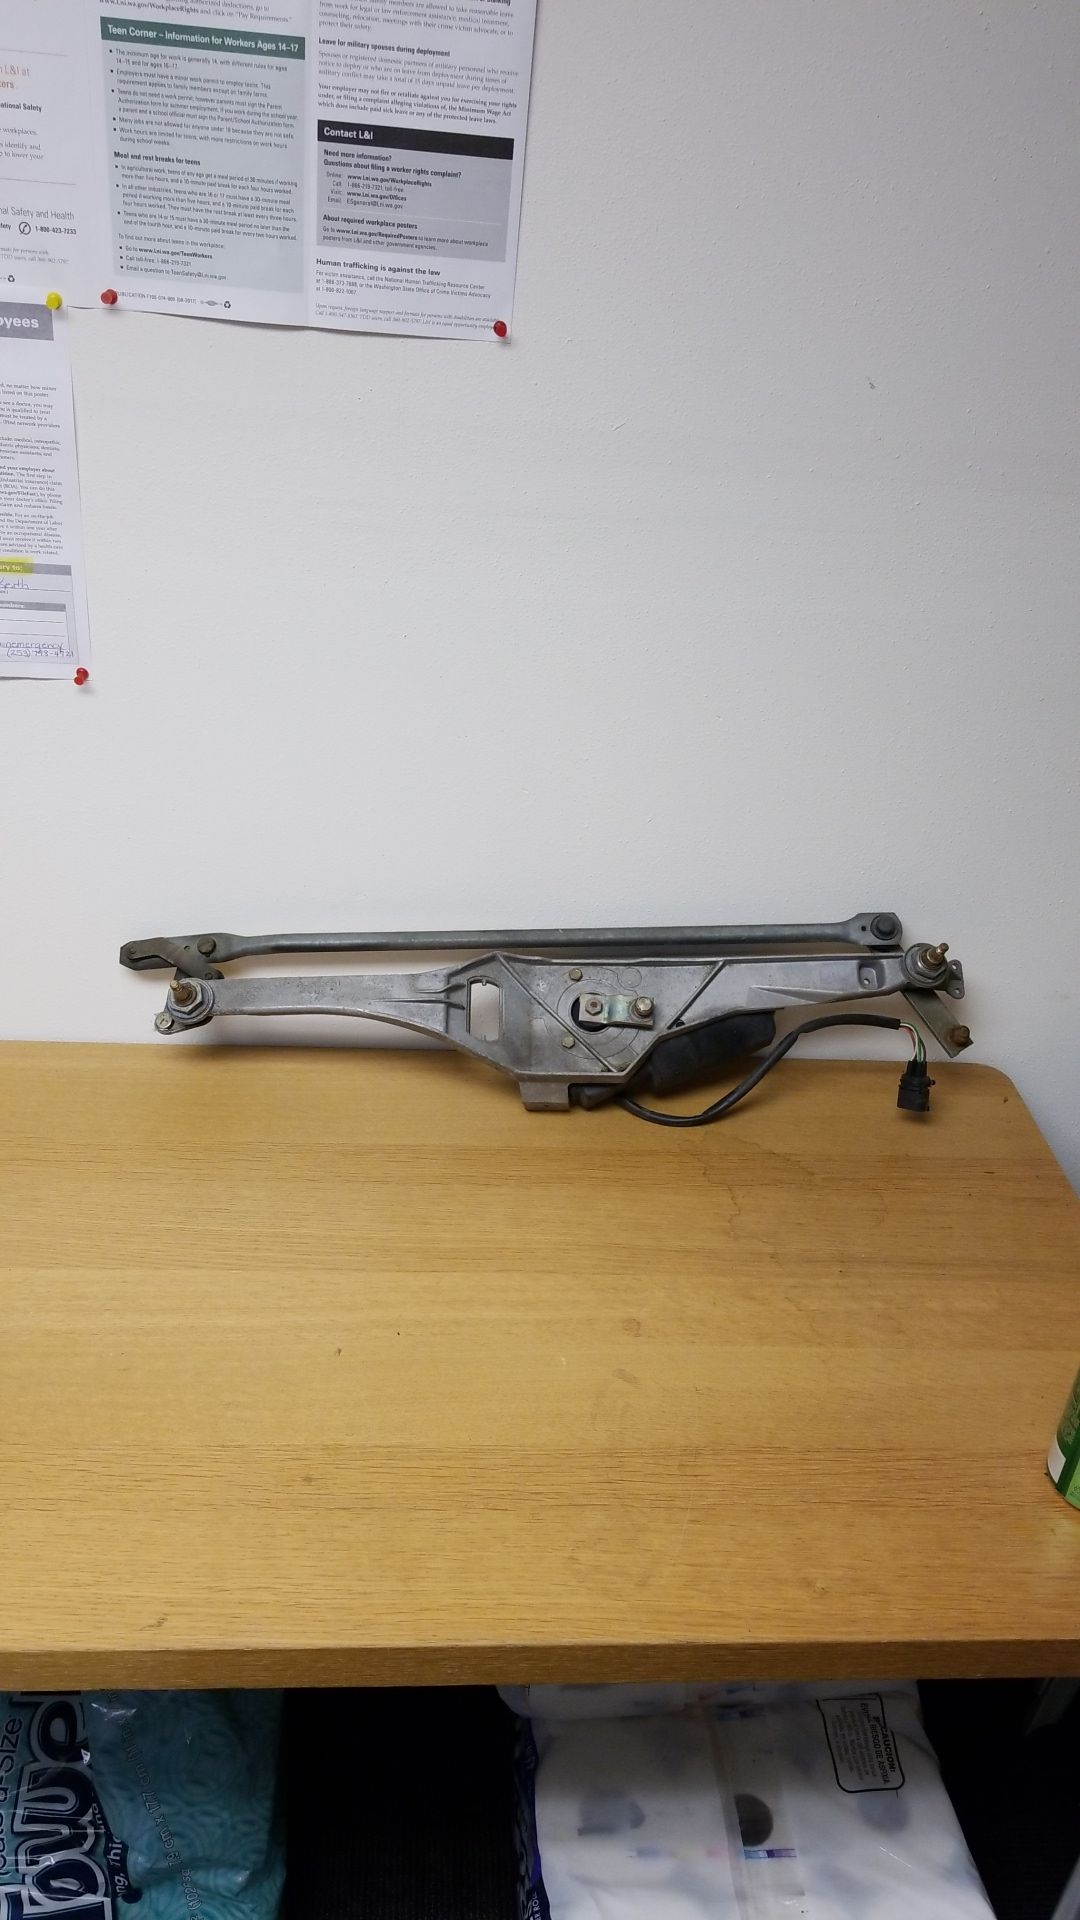 BMW e34 5 series windshield wiper assembly and motor